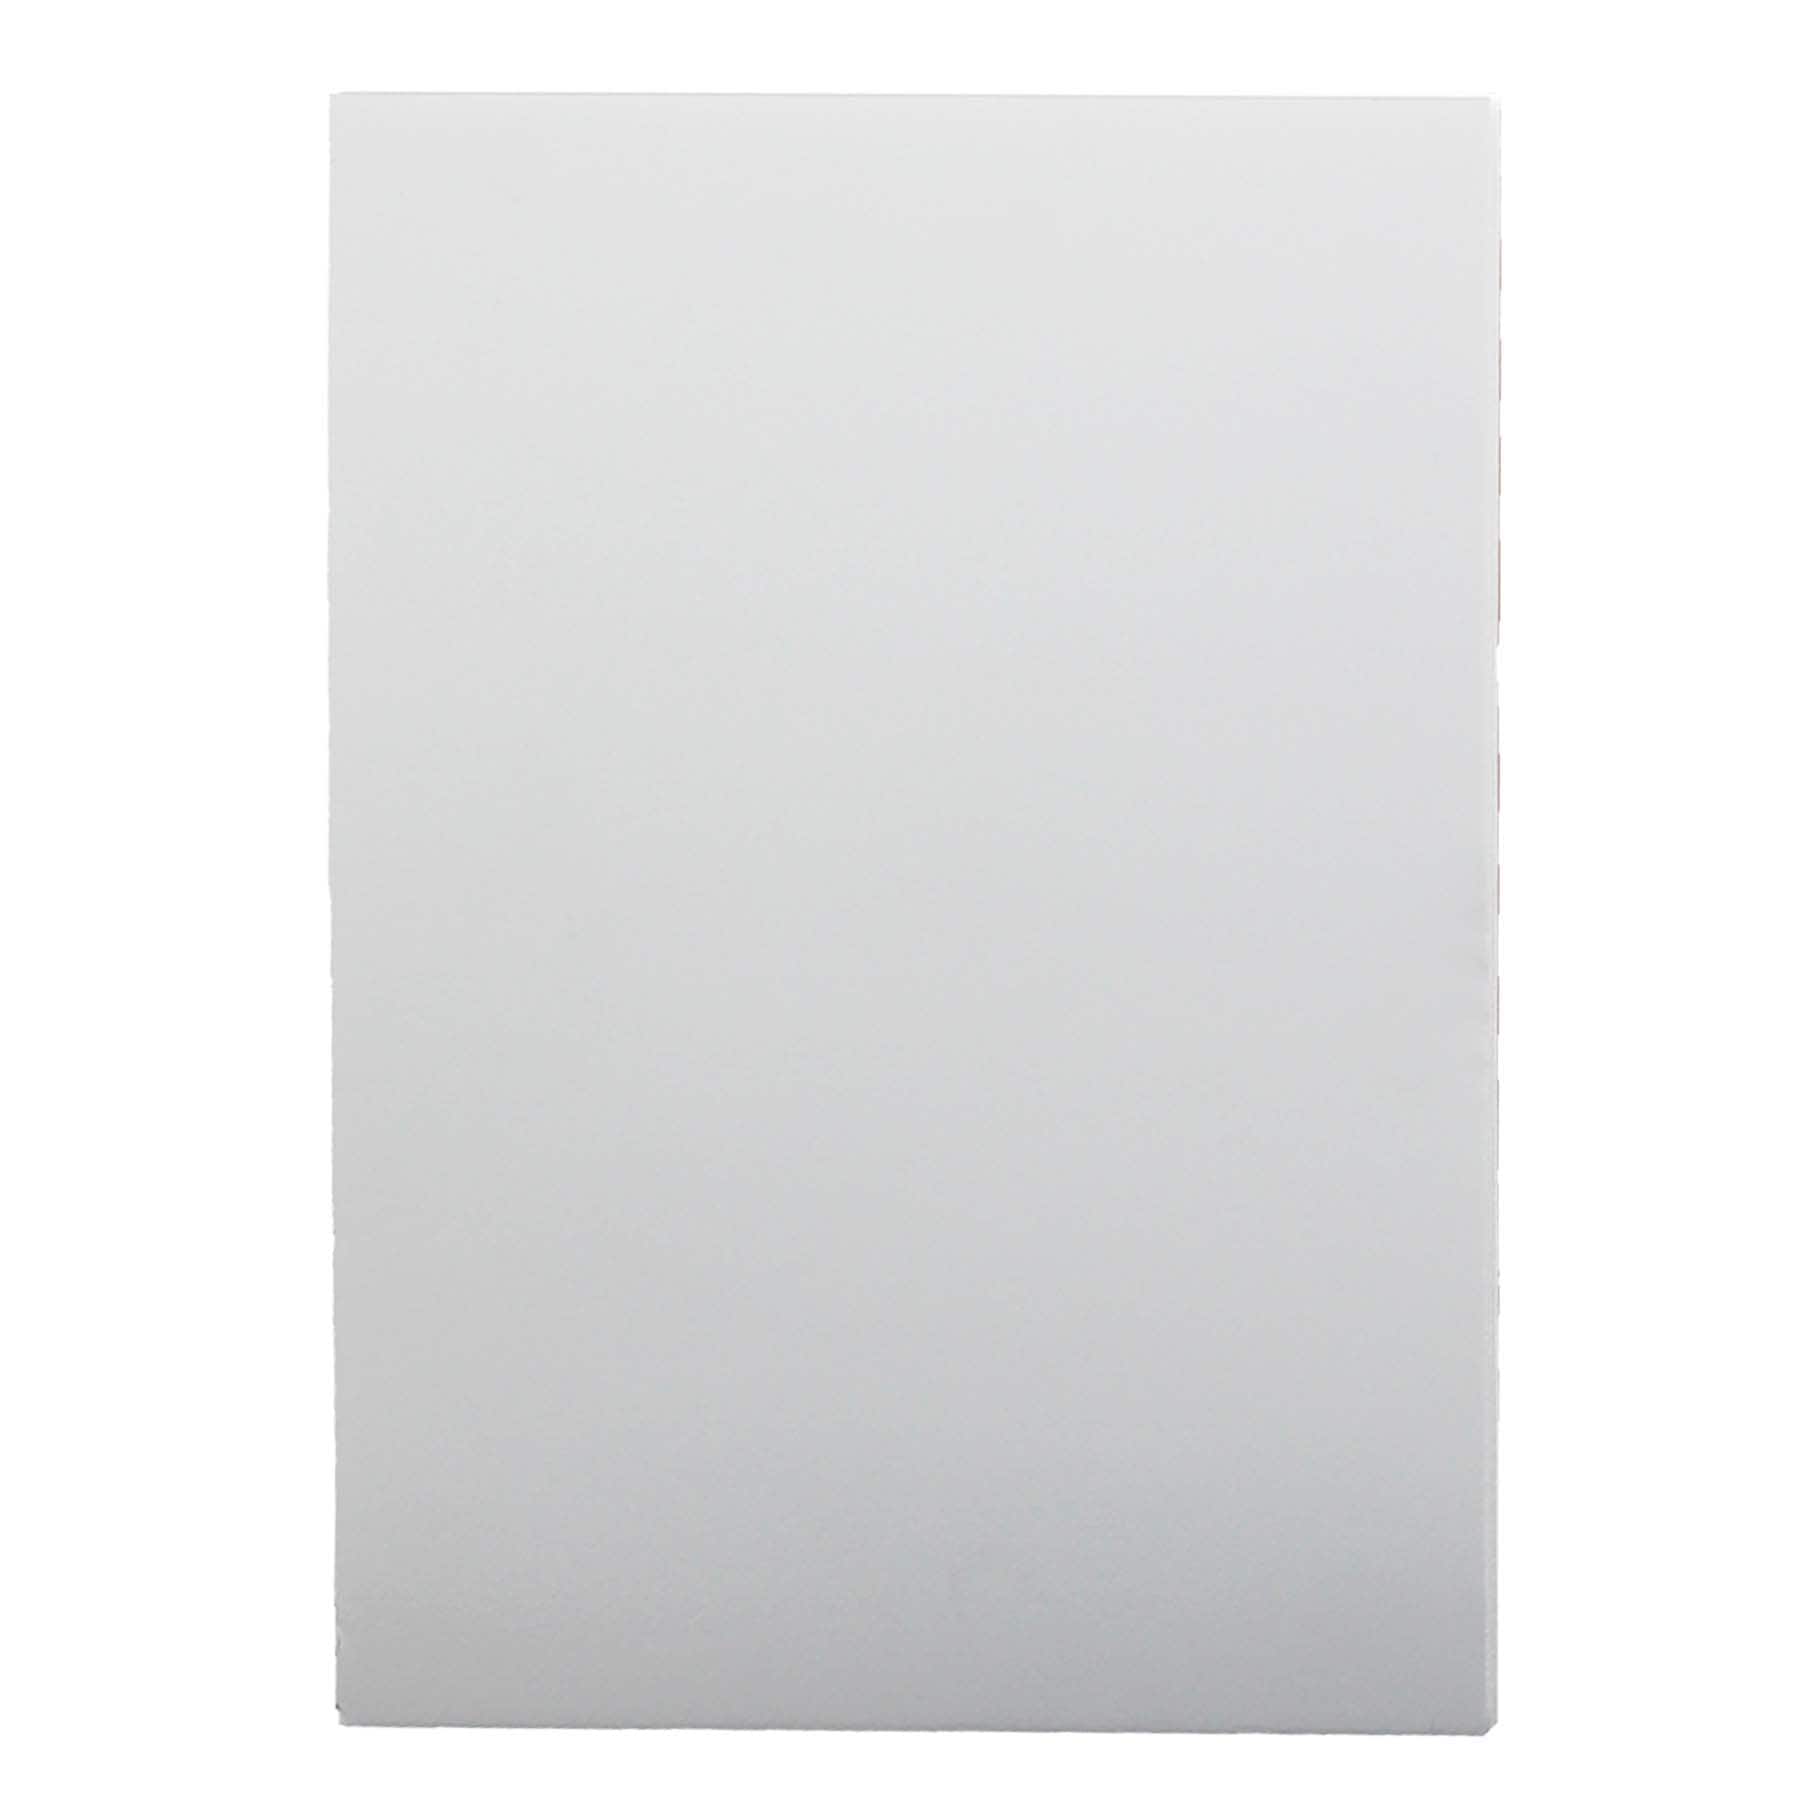 Laminate - Heat Activated Foam Core Mounting Board 24x36